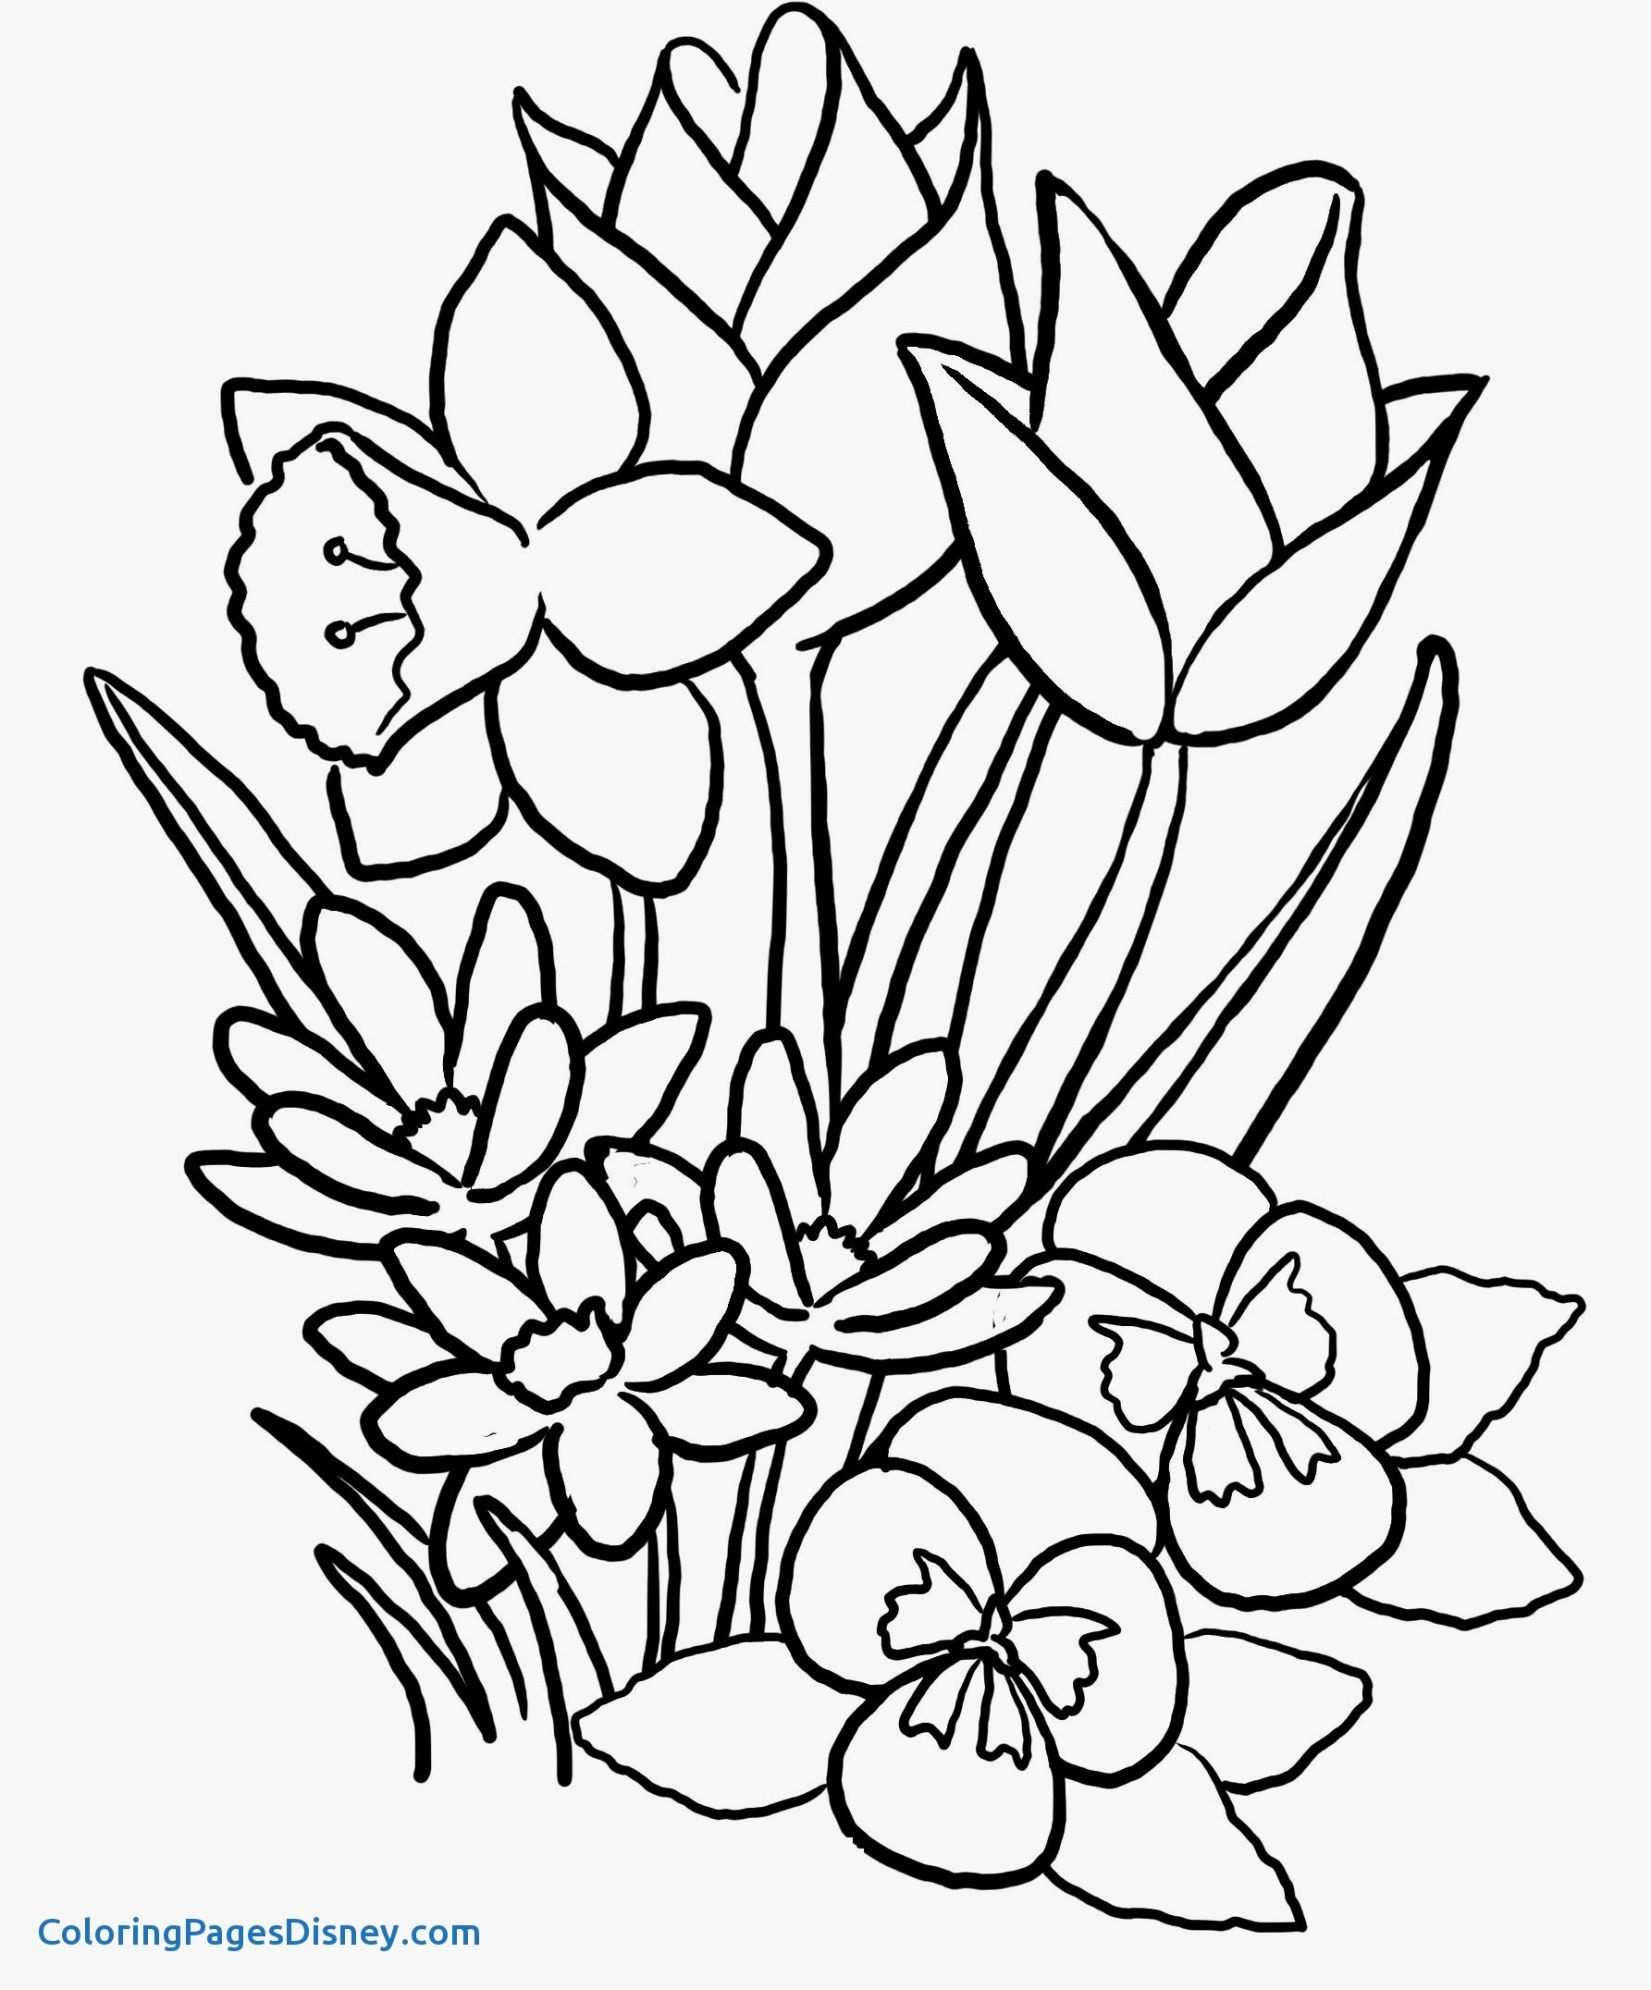 Coloring Pages Of Flowers and butterflies Wallpaper